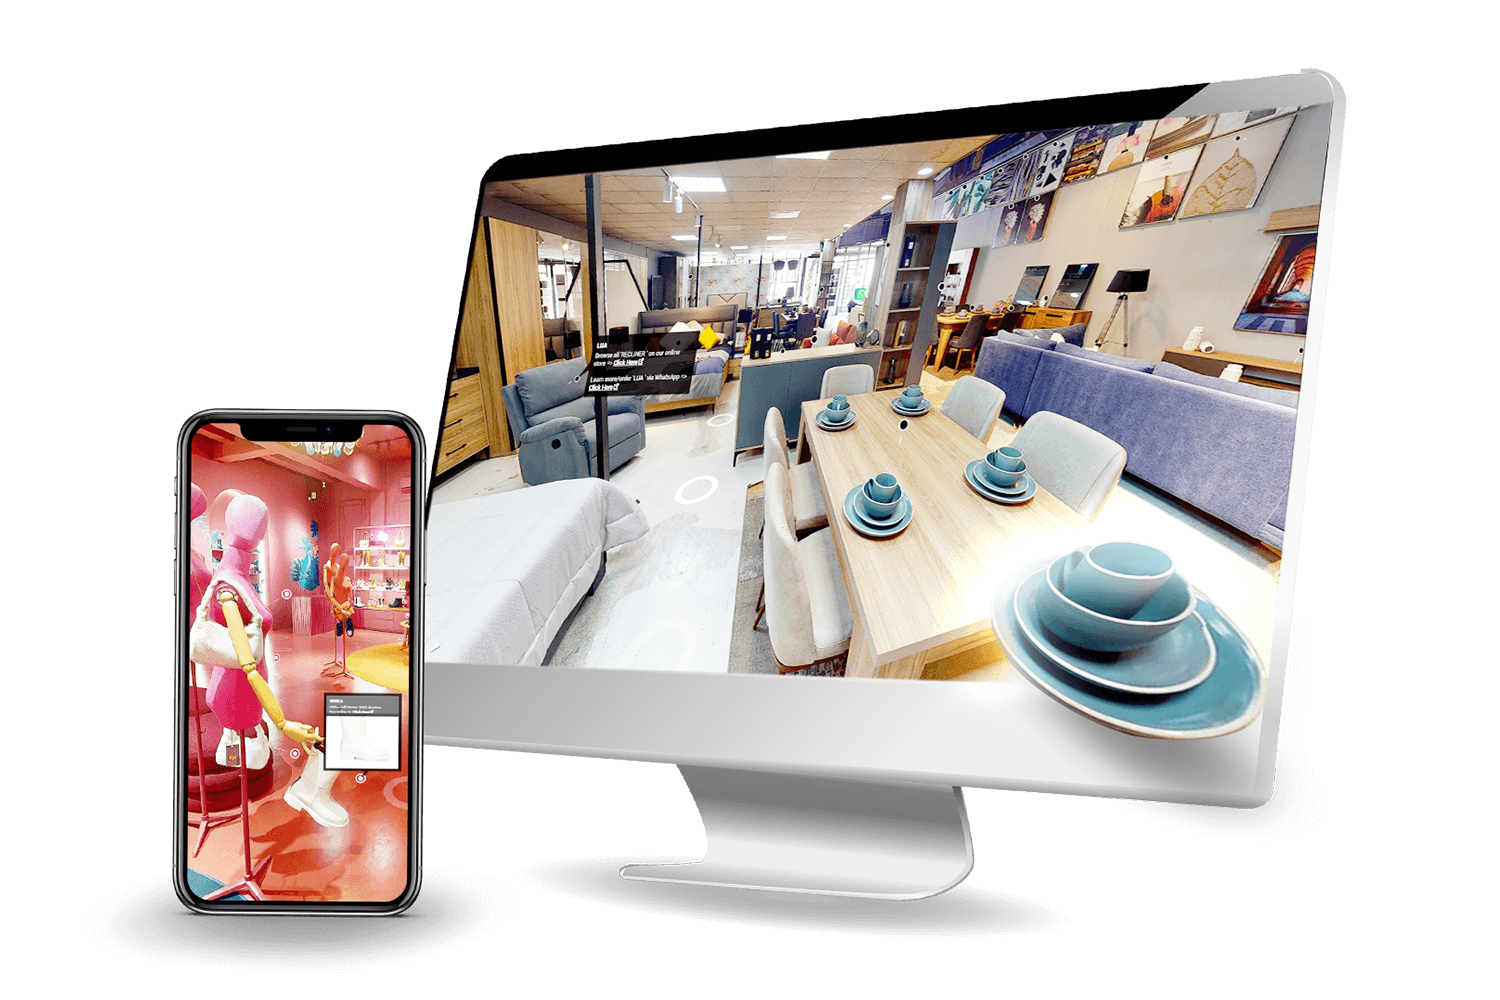 Make your Offline Space Online – Immersive, Interactive, and Digital 360 virtual tours digitize your space and allow users to explore it in an immersive and interactive way, from anywhere, at any time, and on any device.